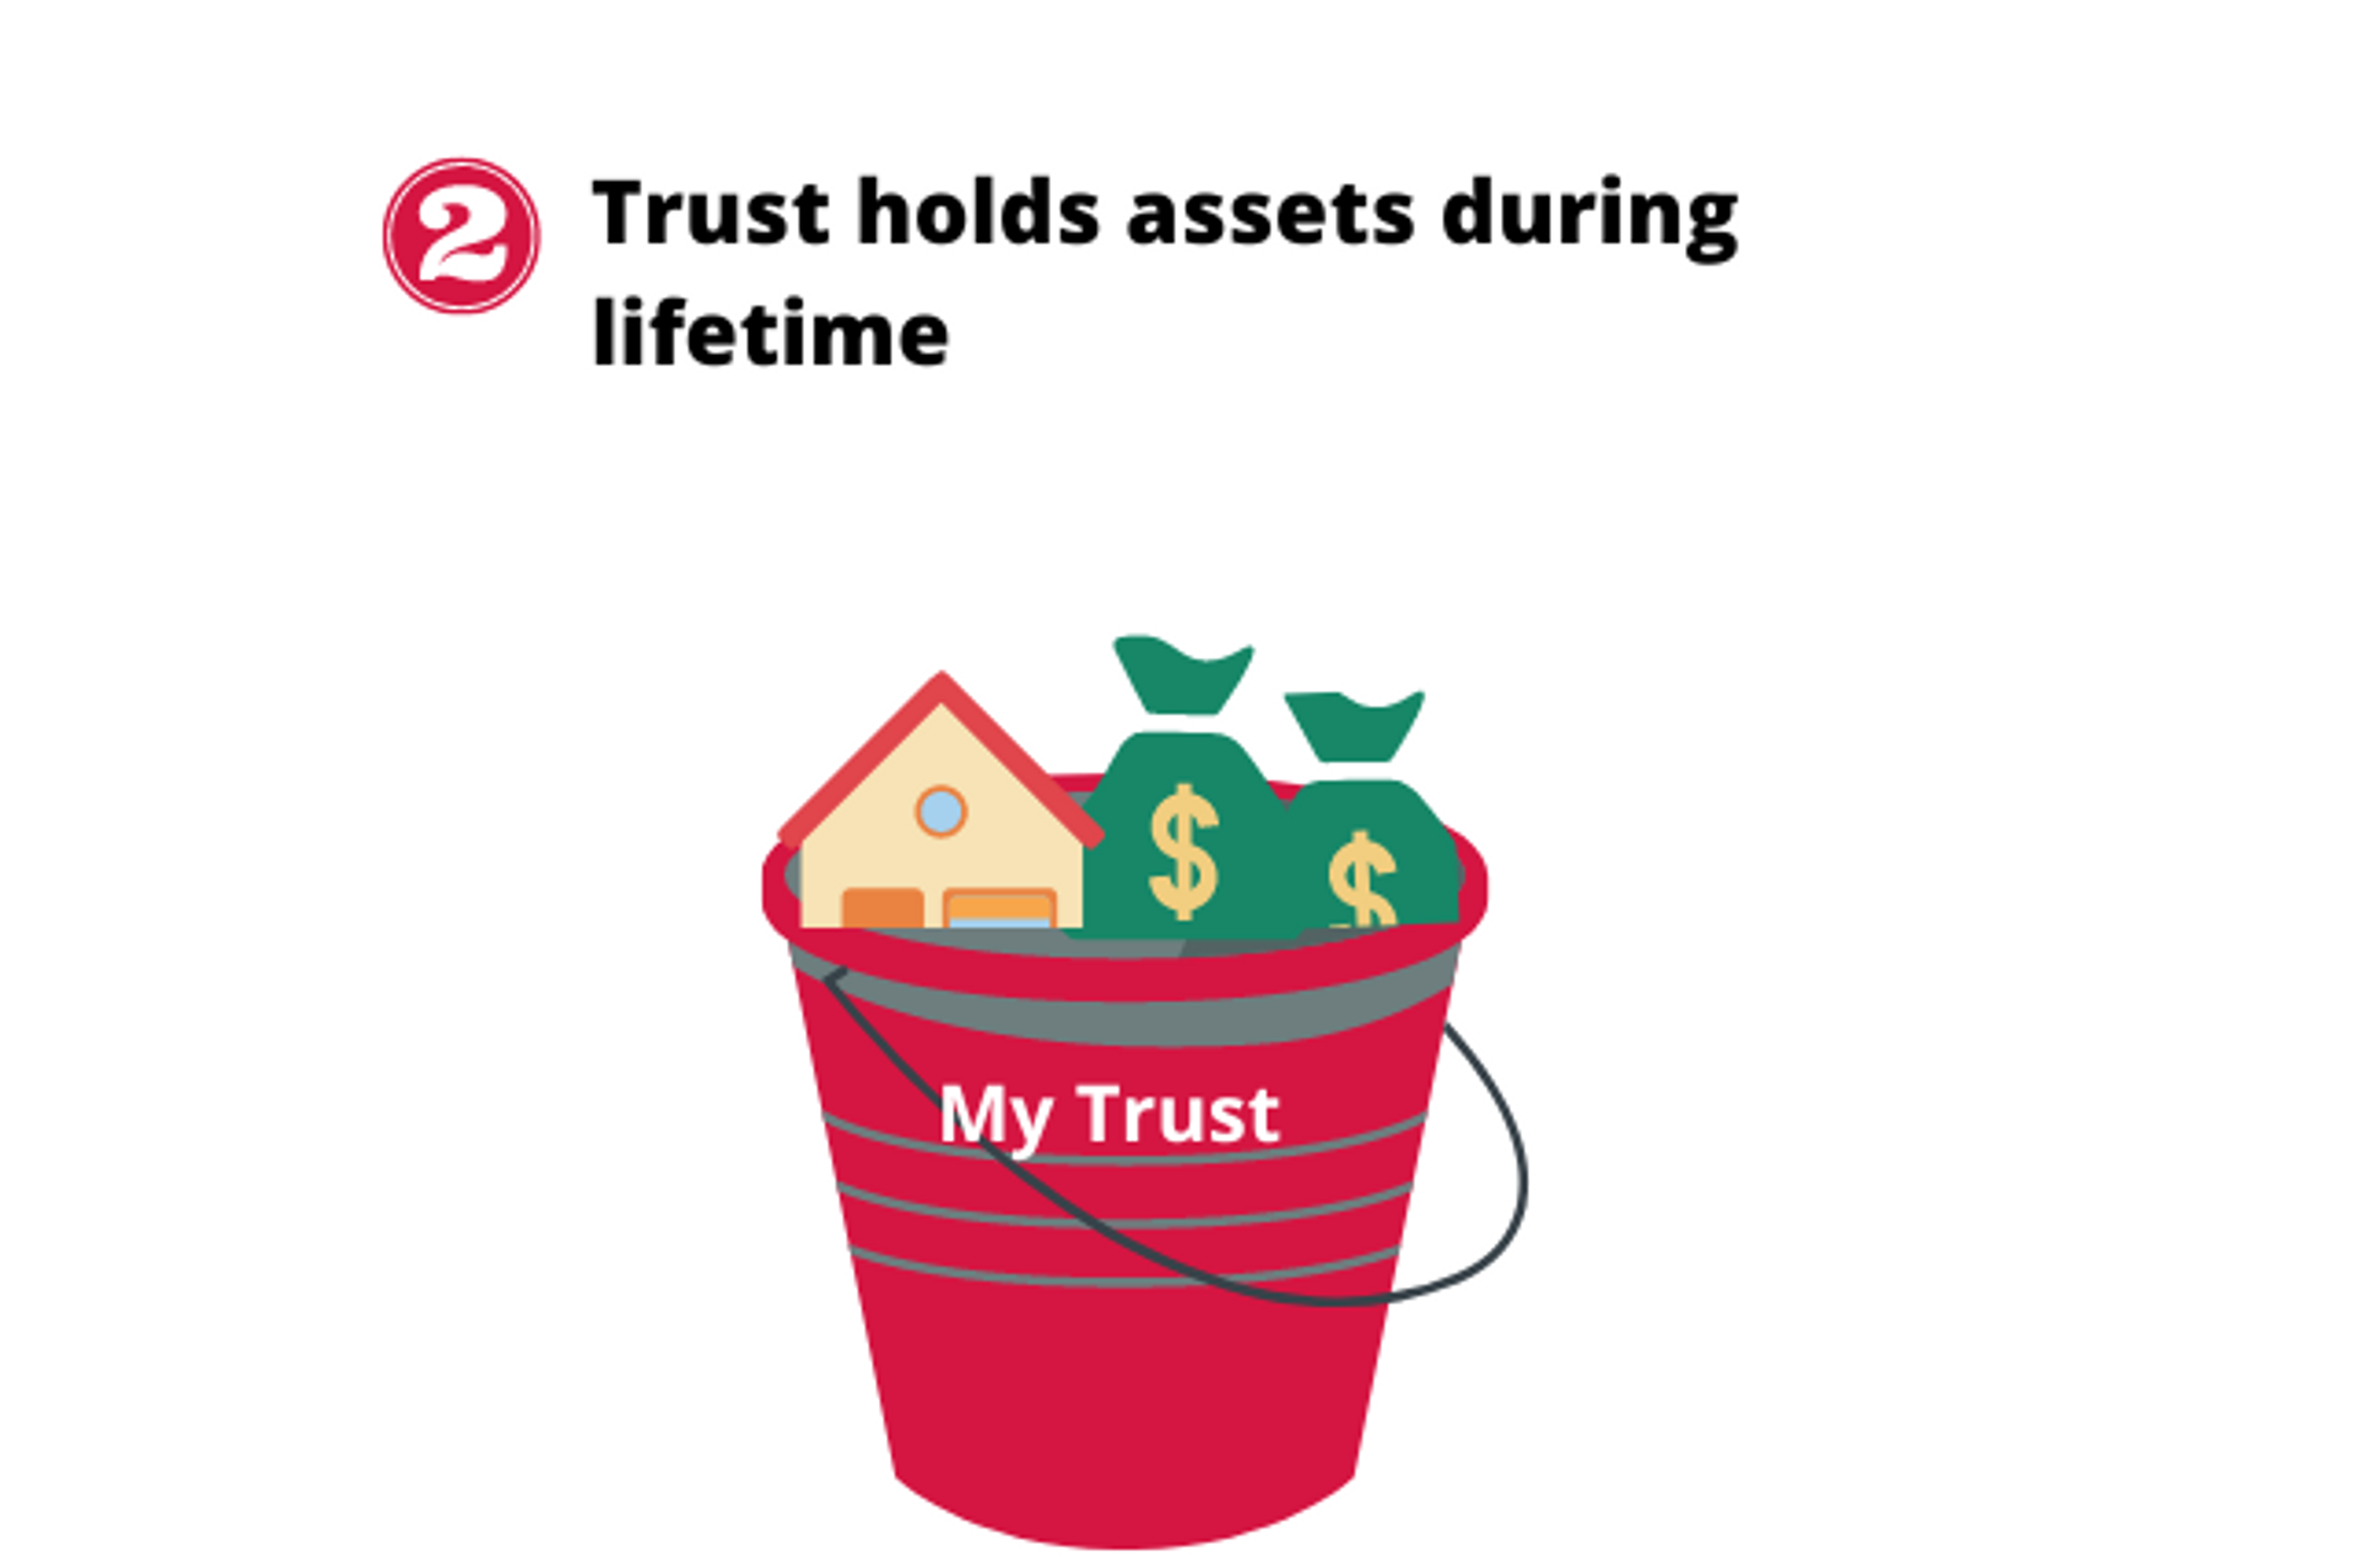 Step 2: trust bucket holding various assets during lifetime